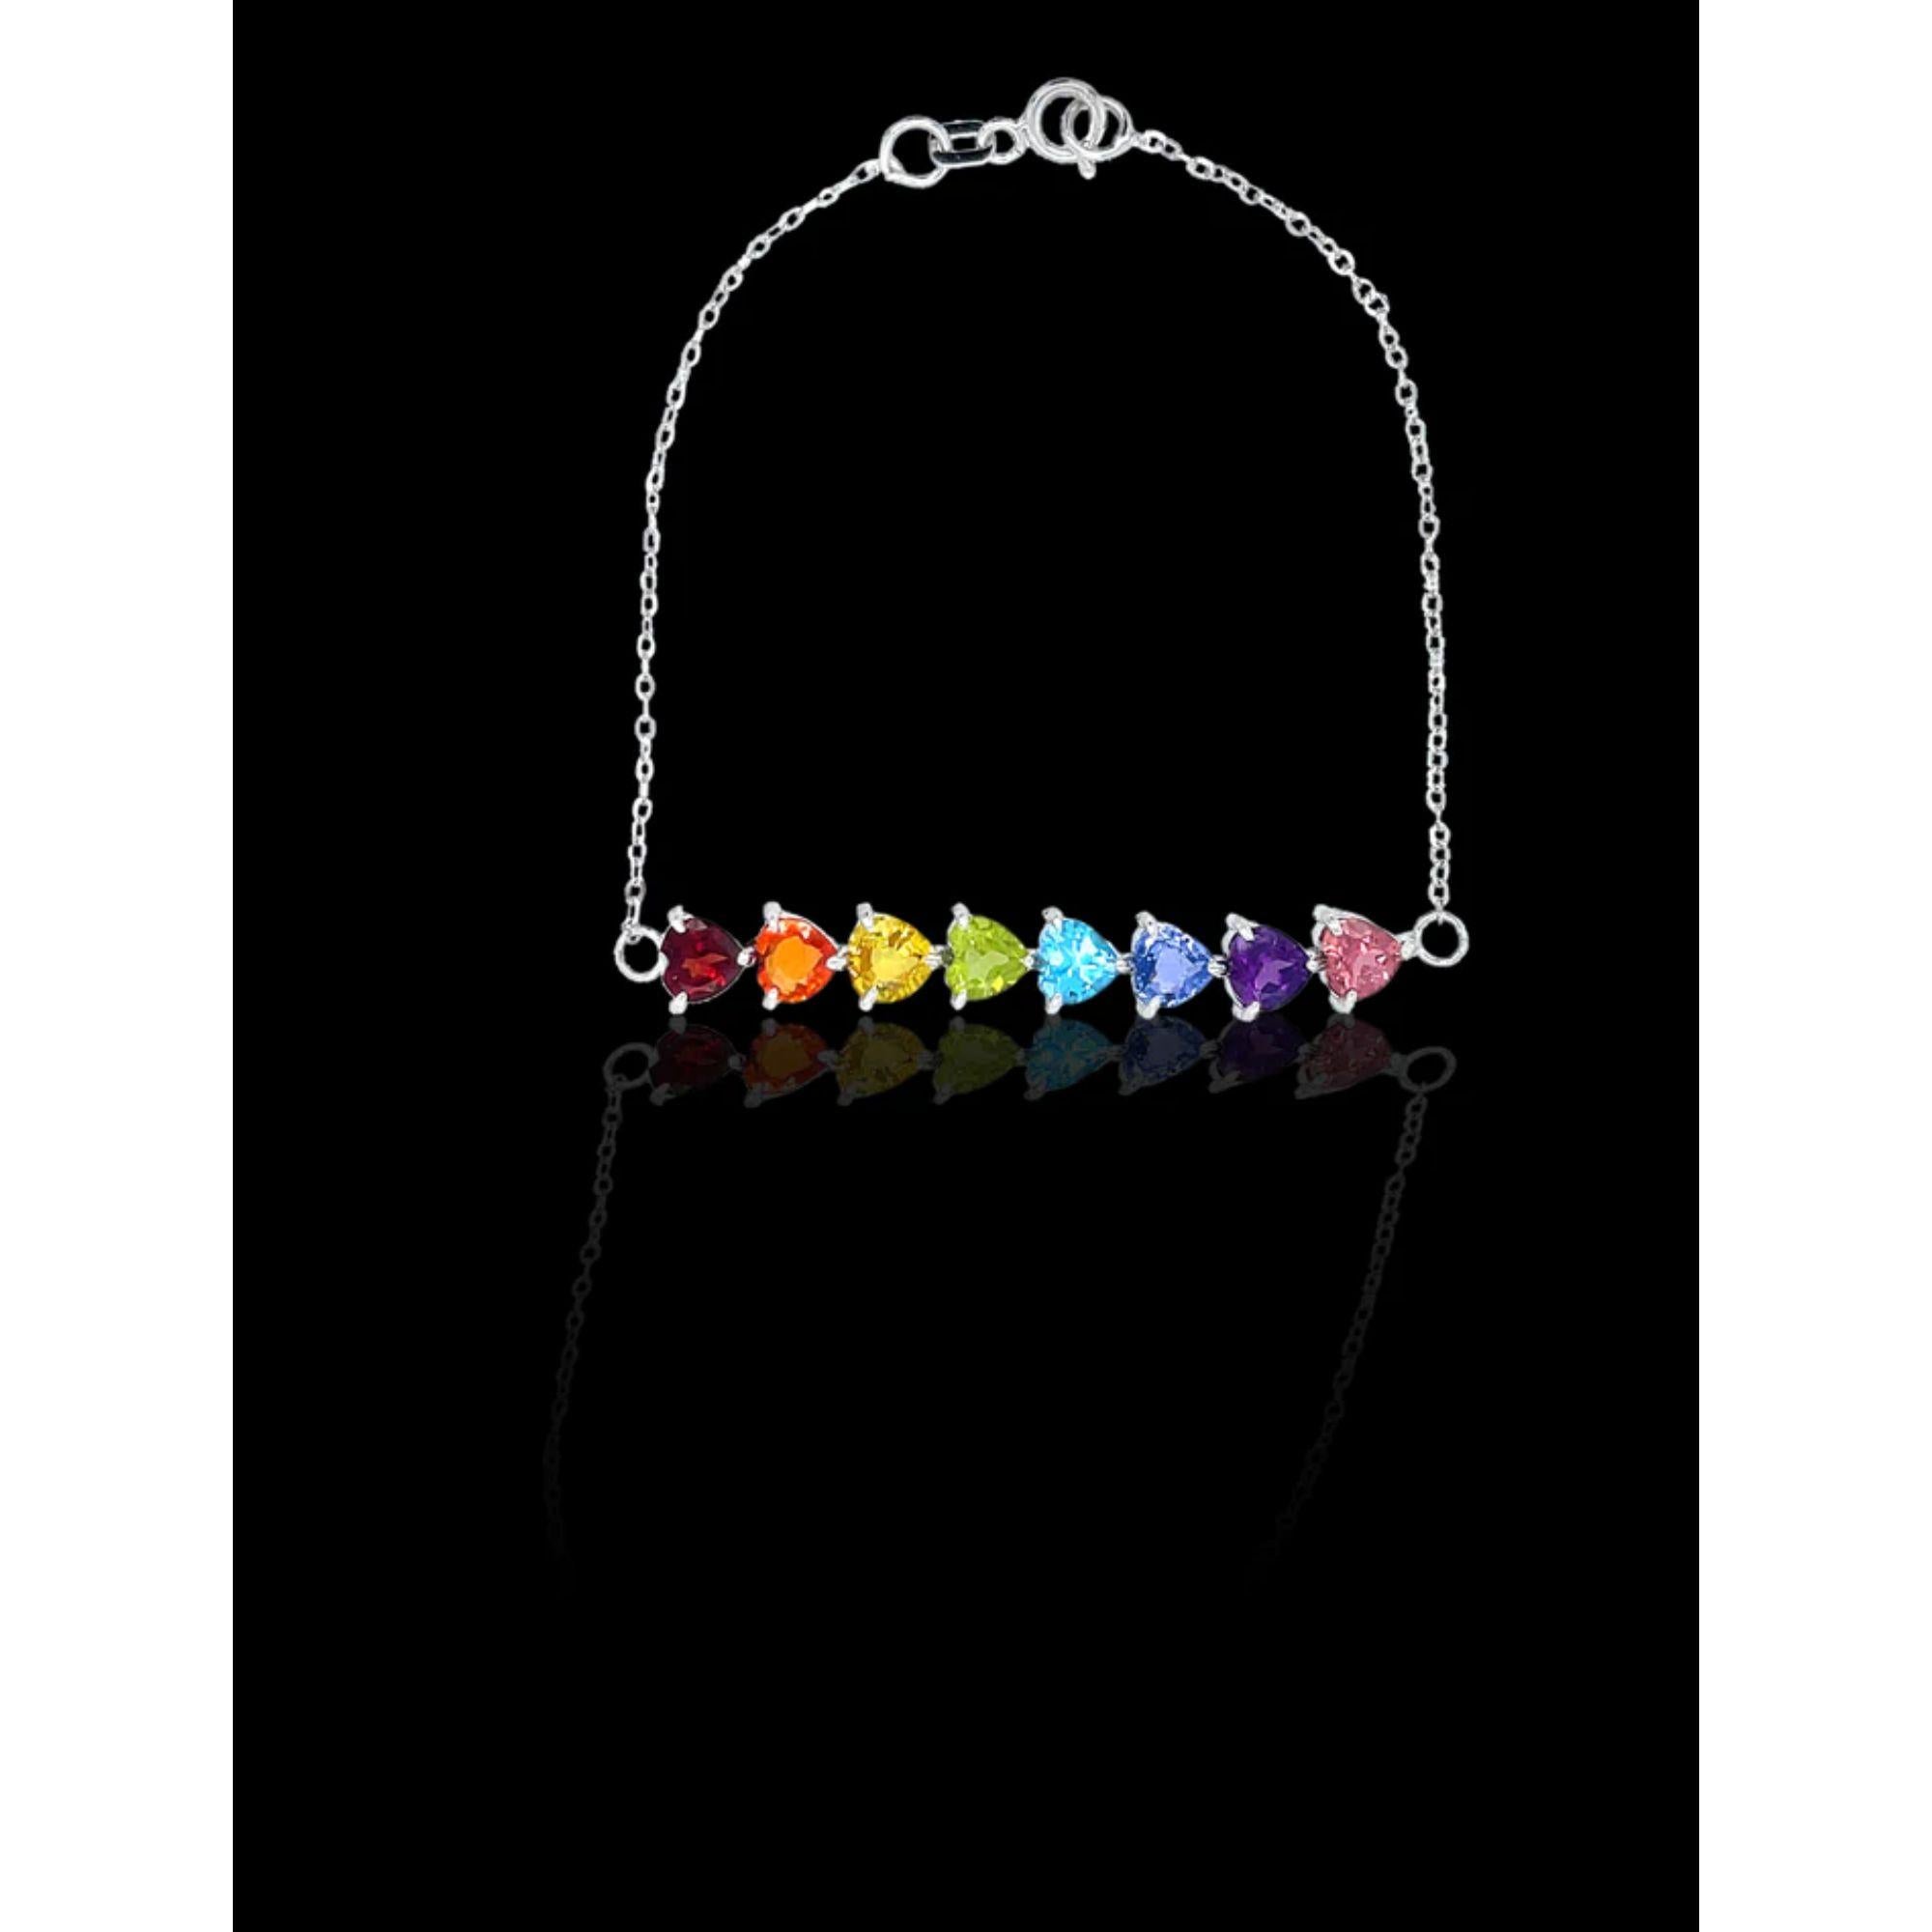 The full rainbow fantasy in the most unique and colorful bracelet to light up your life! 8 gems in the order of the rainbow connected with a thin roll chain make this bracelet. This dainty rainbow bracelet is like no other consists of heart settings